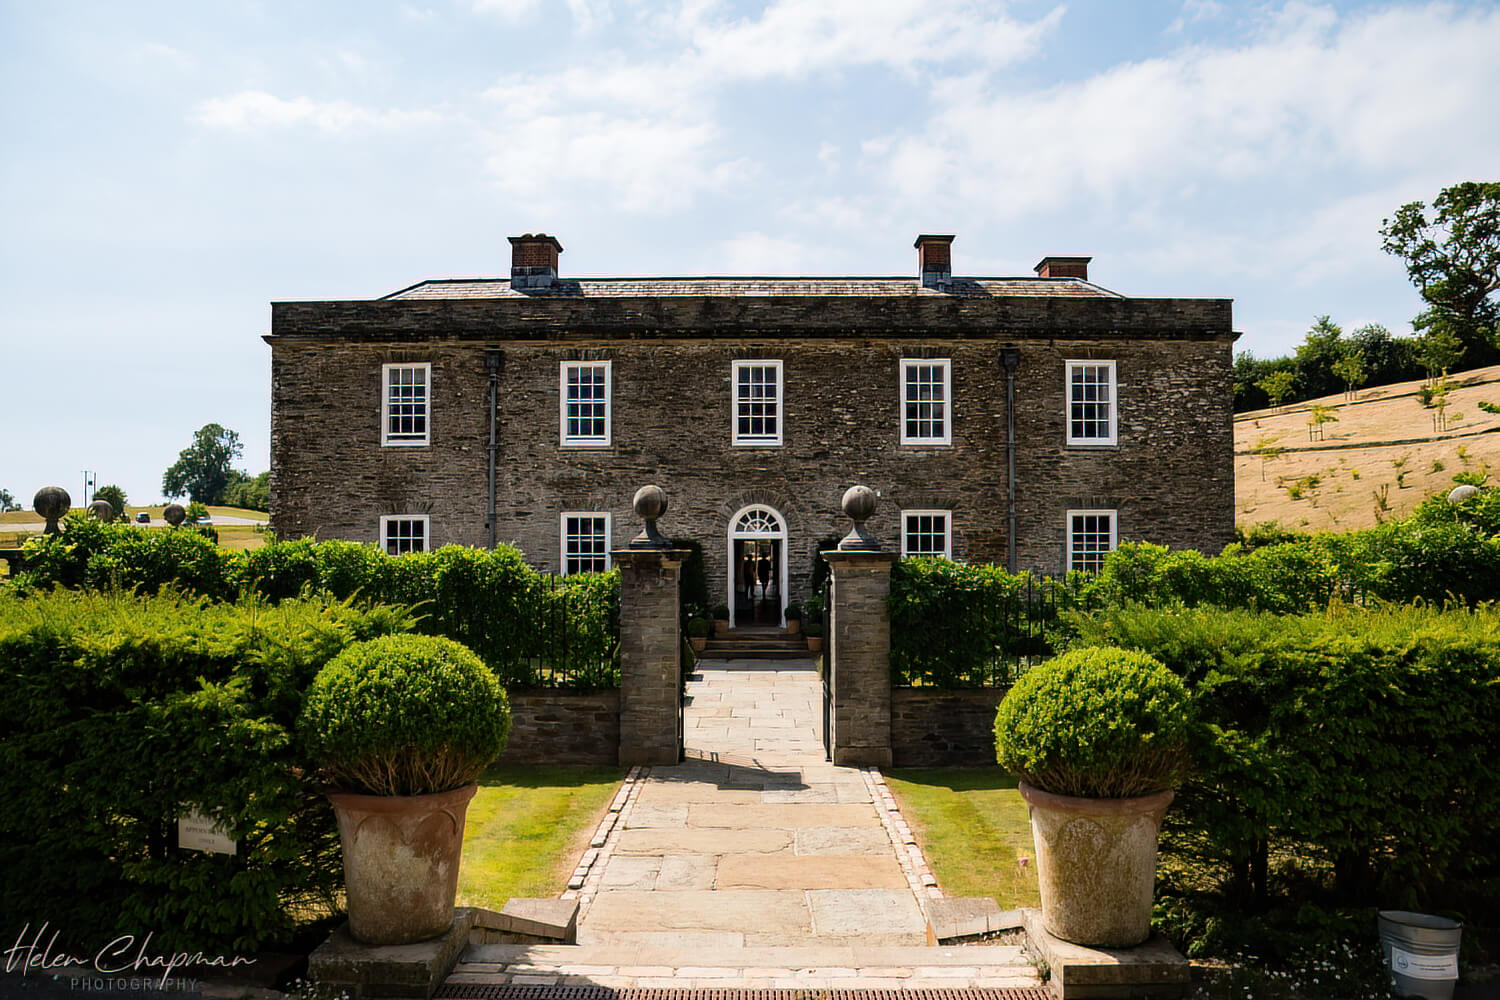 Elegant two-story stone house with a central entrance flanked by round topiary bushes, set against a clear sky and surrounded by well-manicured lawns.